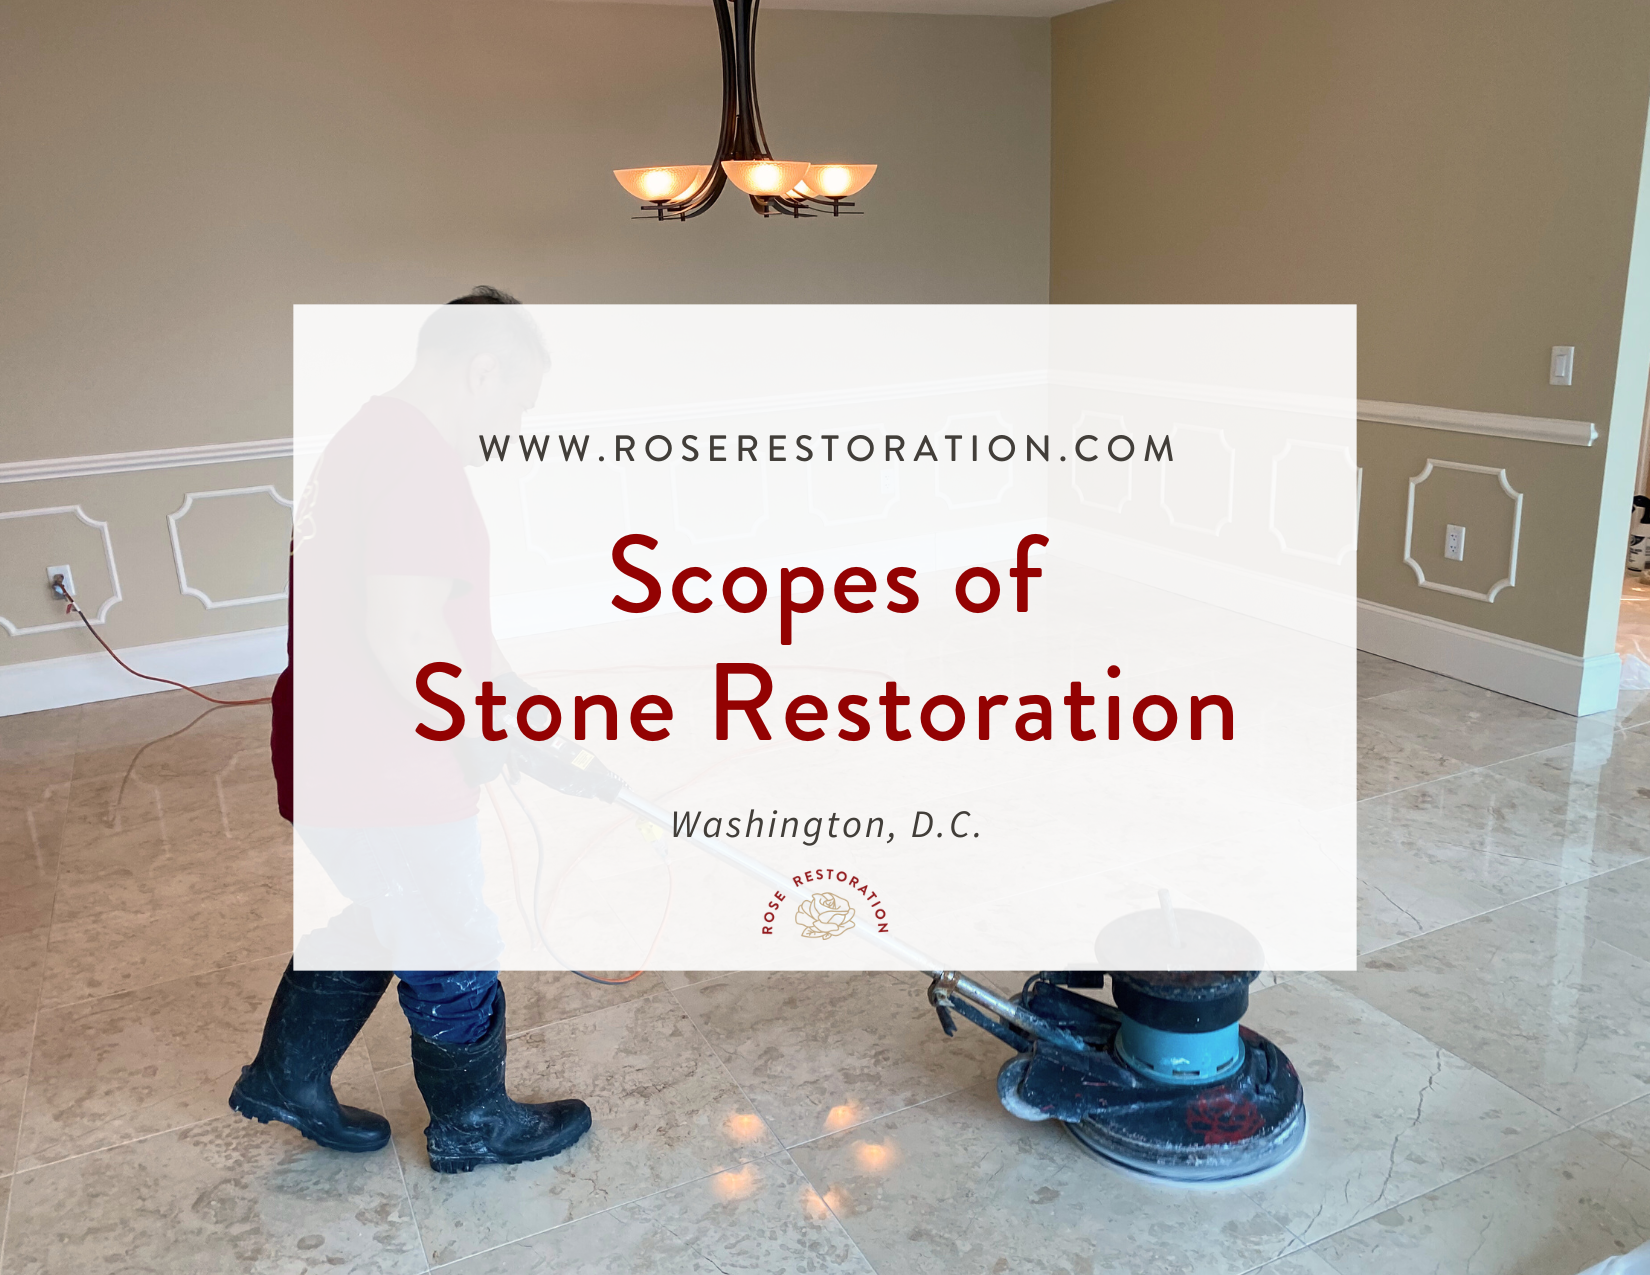 "Scopes of Stone Restoration" text overlayed on a man polishing a marble floor.